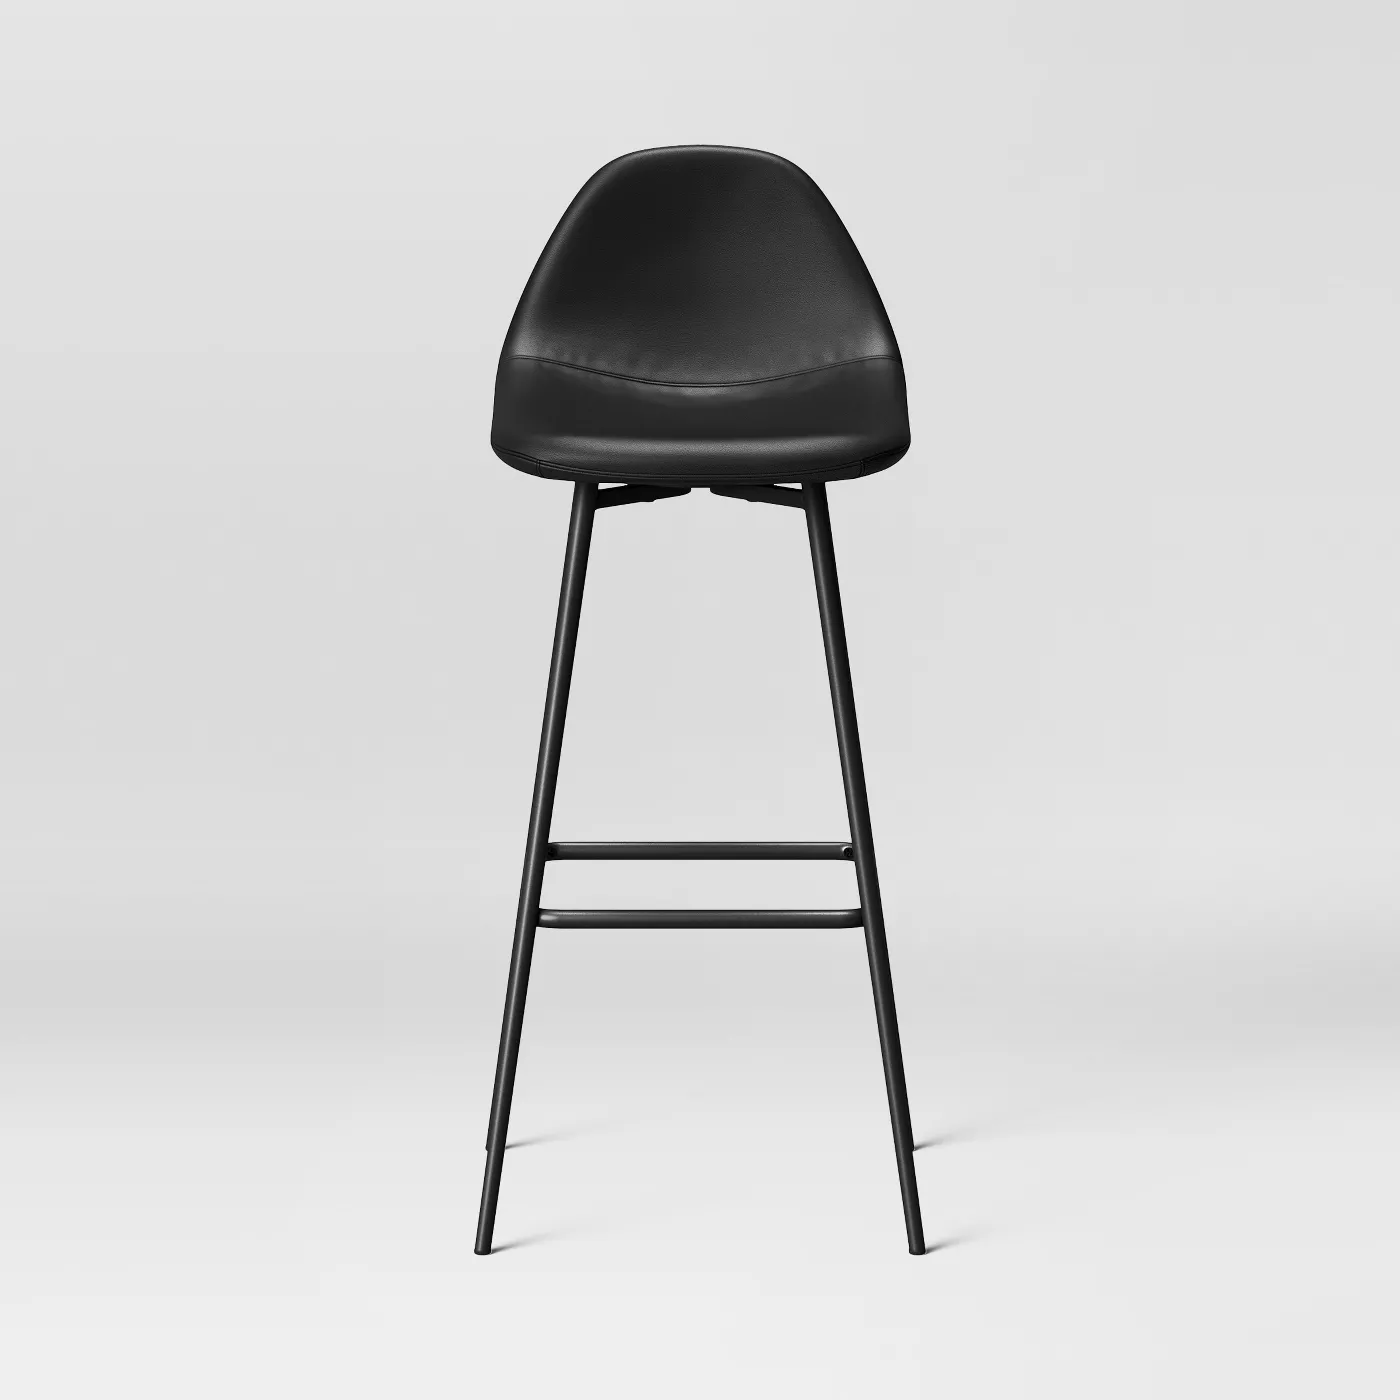 Shop Copley Upholstered Barstool with Faux Leather - Project 62 from Target on Openhaus